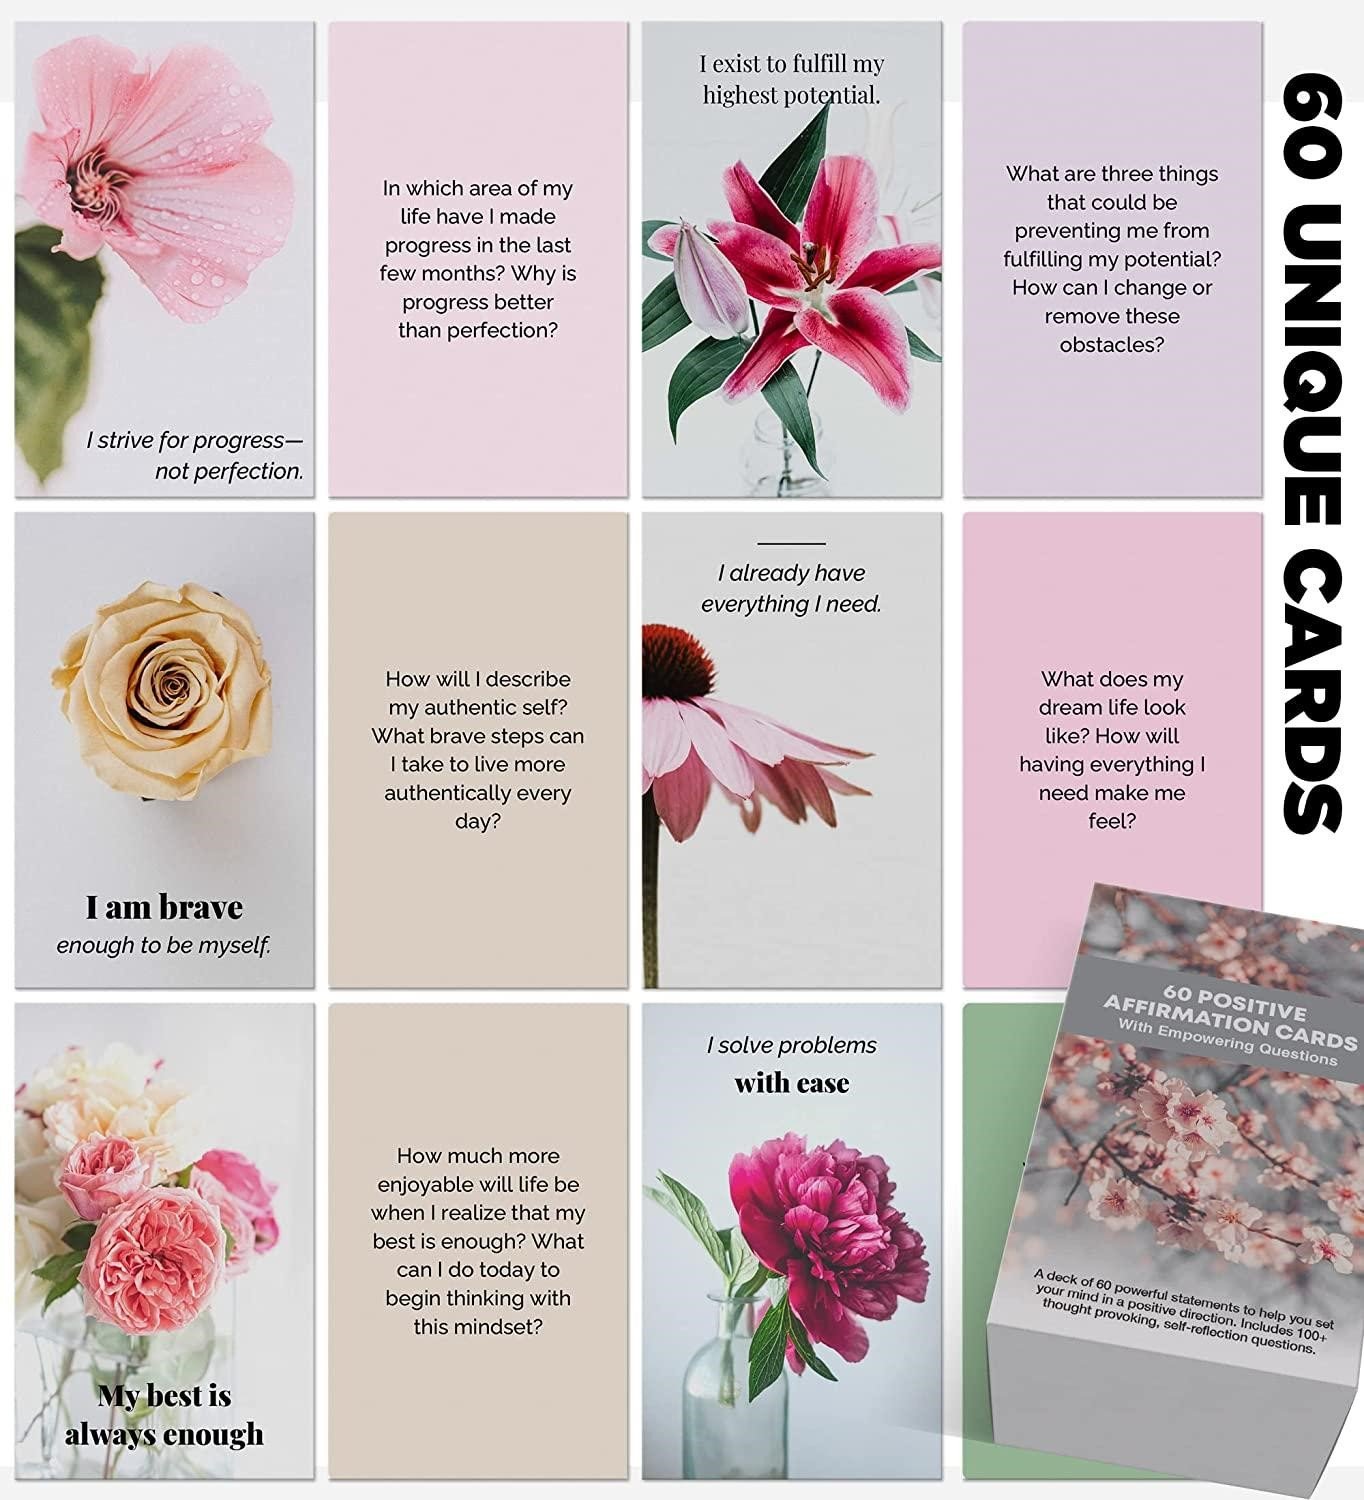 Dessie Affirmations Cards with though proviking questions